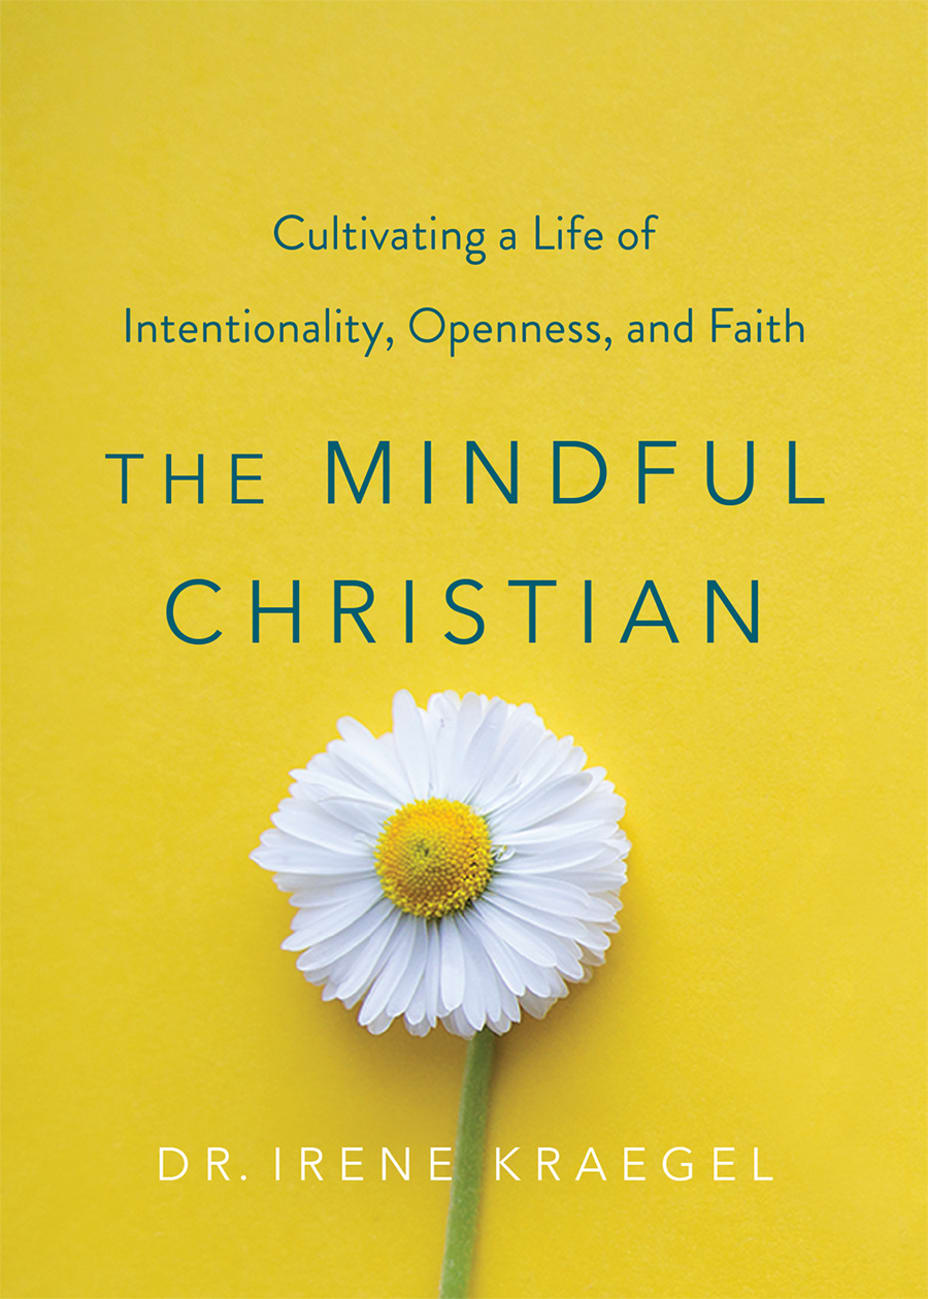 The Mindful Christian: Cultivating a Life of Intentionality, Openness, and Faith Hardback